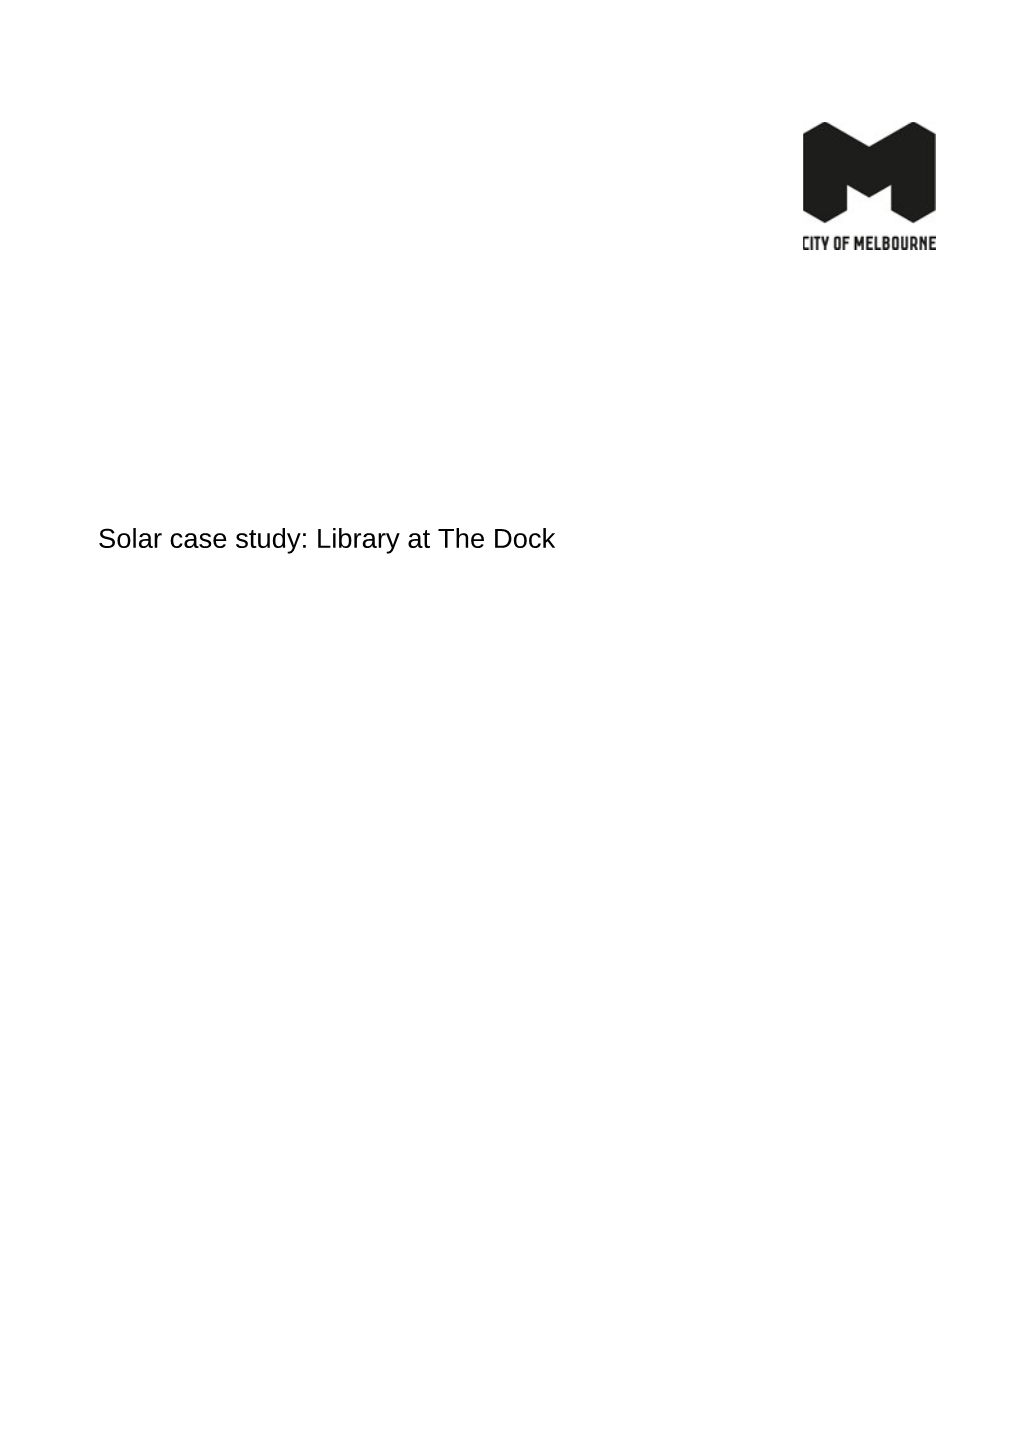 Solar Case Study: Library at the Dock